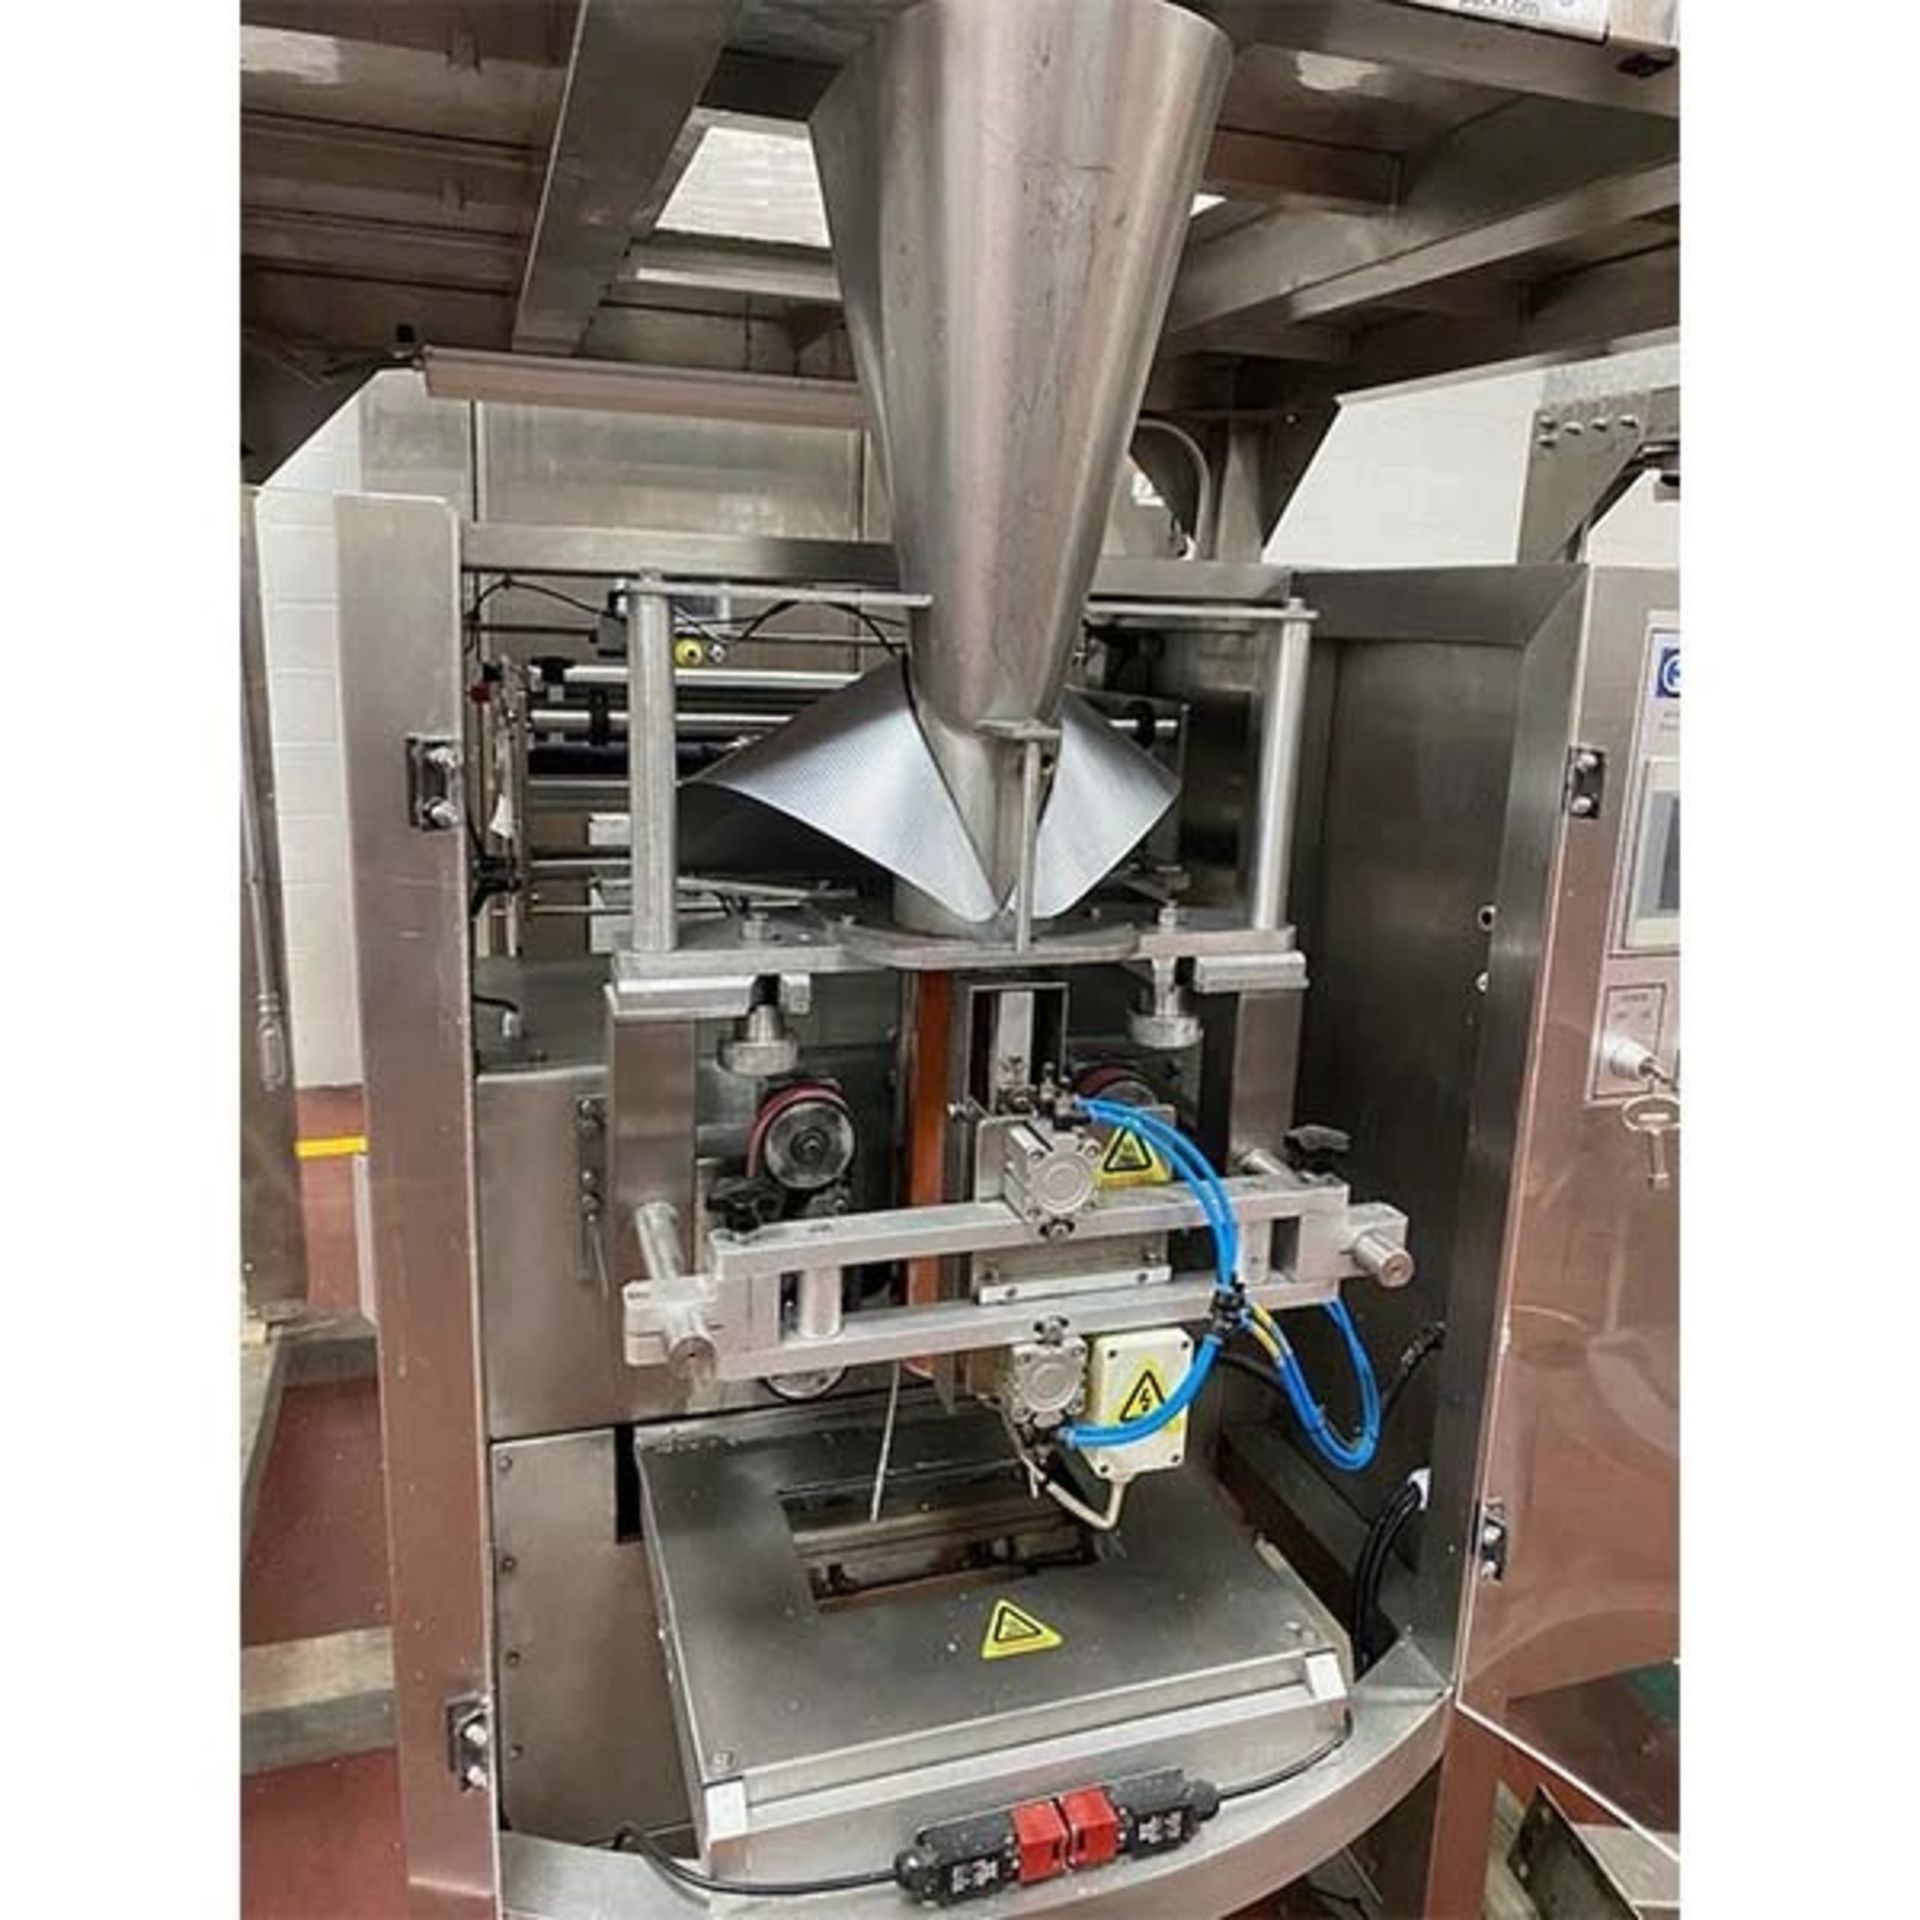 2018/2019 Ohlson Continuous Weighing and Vertical Form, Fill and Seal System includes - Image 8 of 13